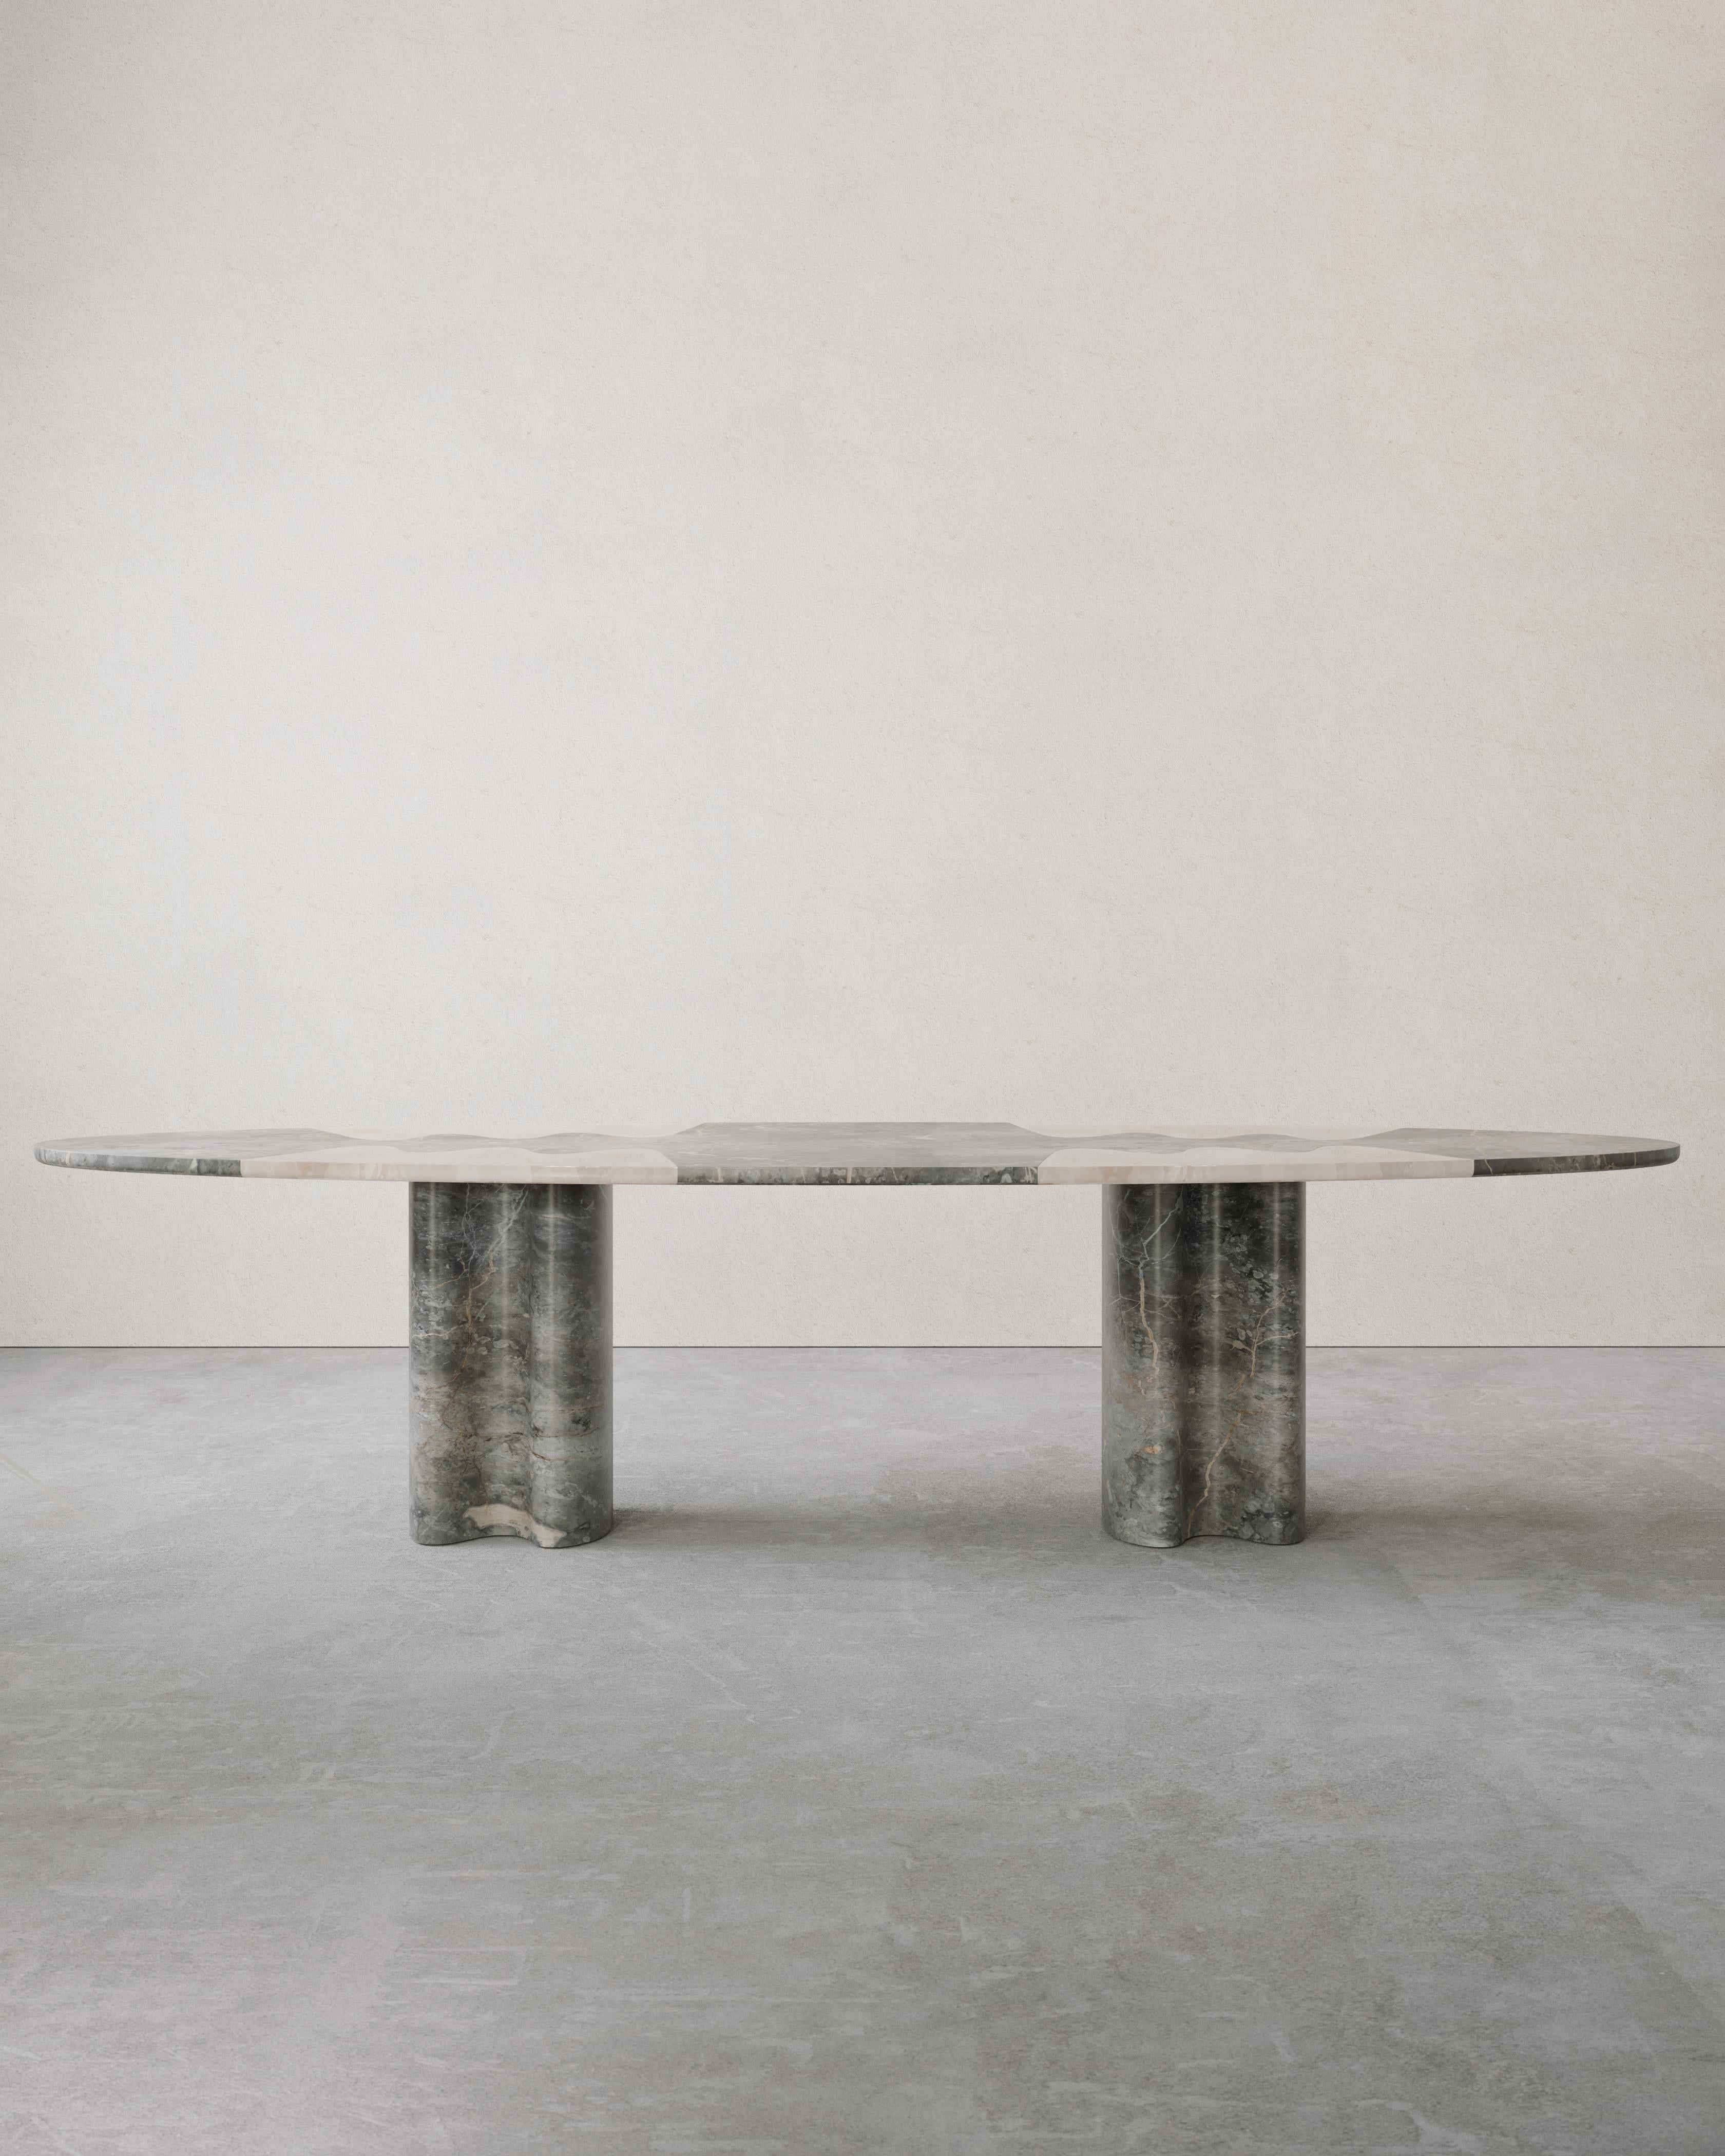 Lavanche dining table by Piotr Dabrowa
One of a kind.
Dimensions: W 300 x D 120 x H 72 cm.
Materials: Fior di Bosco marble, white Onyx.
Produced by Serafini.

Piotr Dabrowa (1990). Multidisciplinary Designer focused on the collectible design of